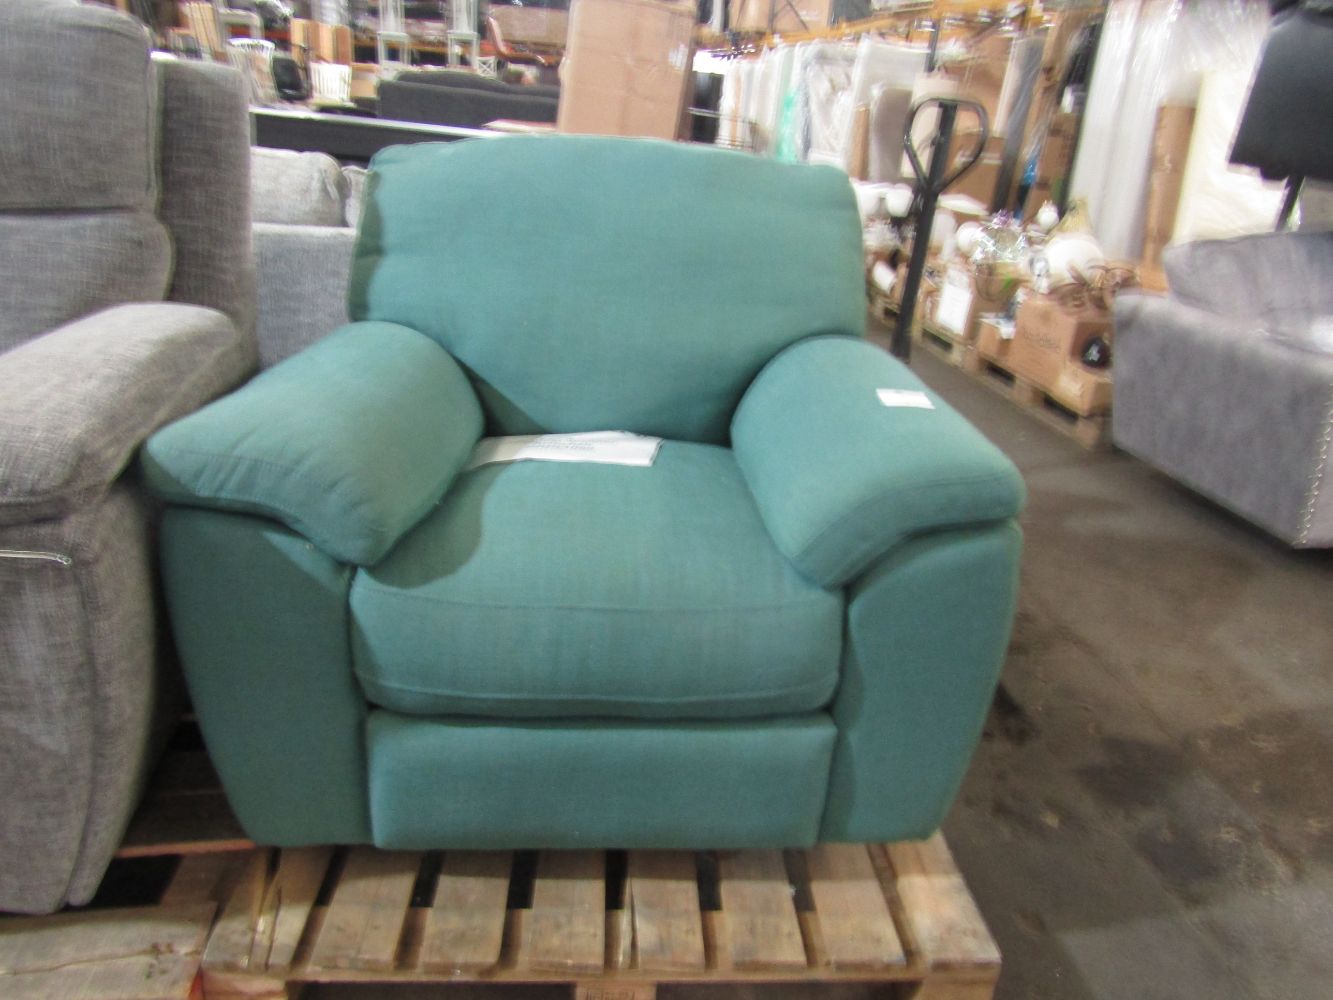 Sofas and Armchairs from SCS at up to 90% off RRP